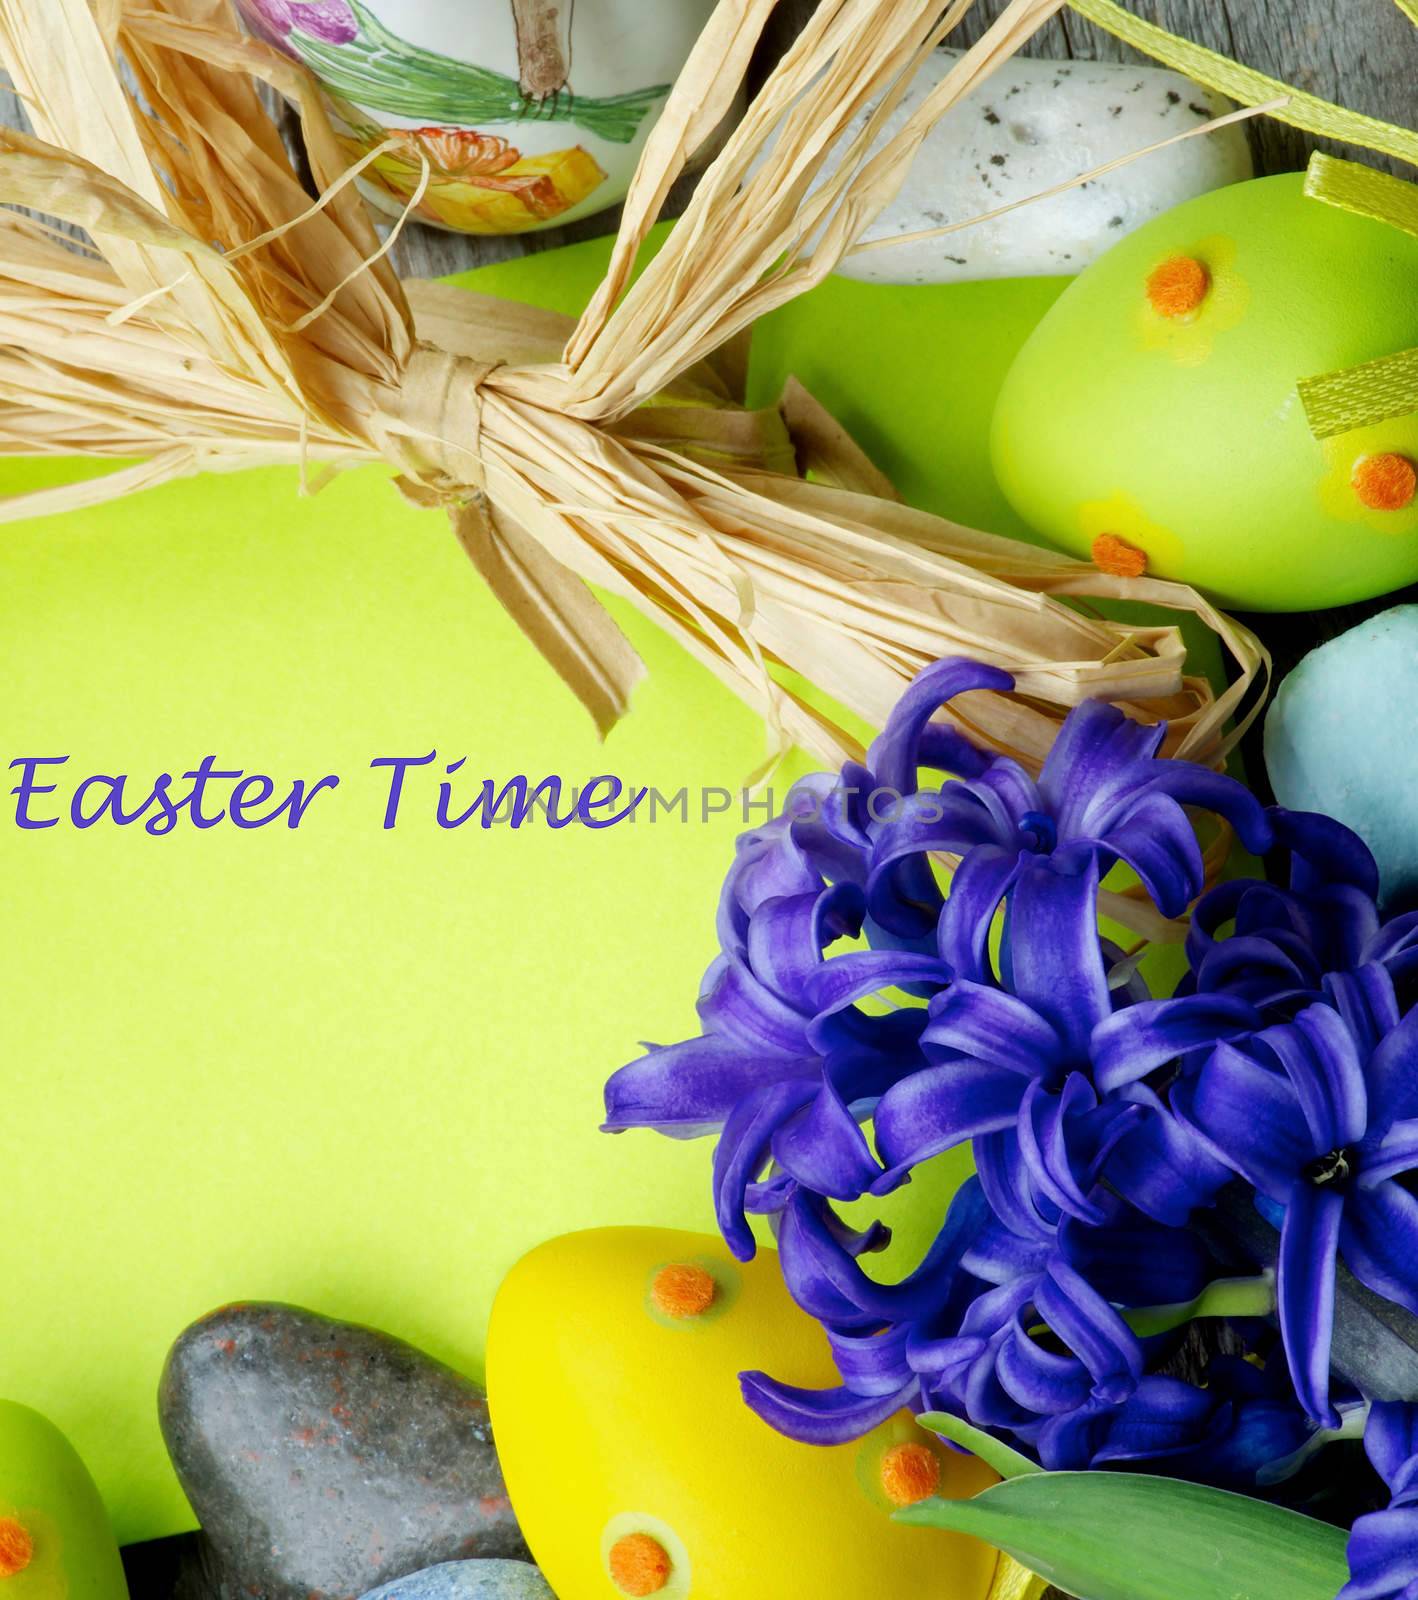 Easter Greeting Card by zhekos